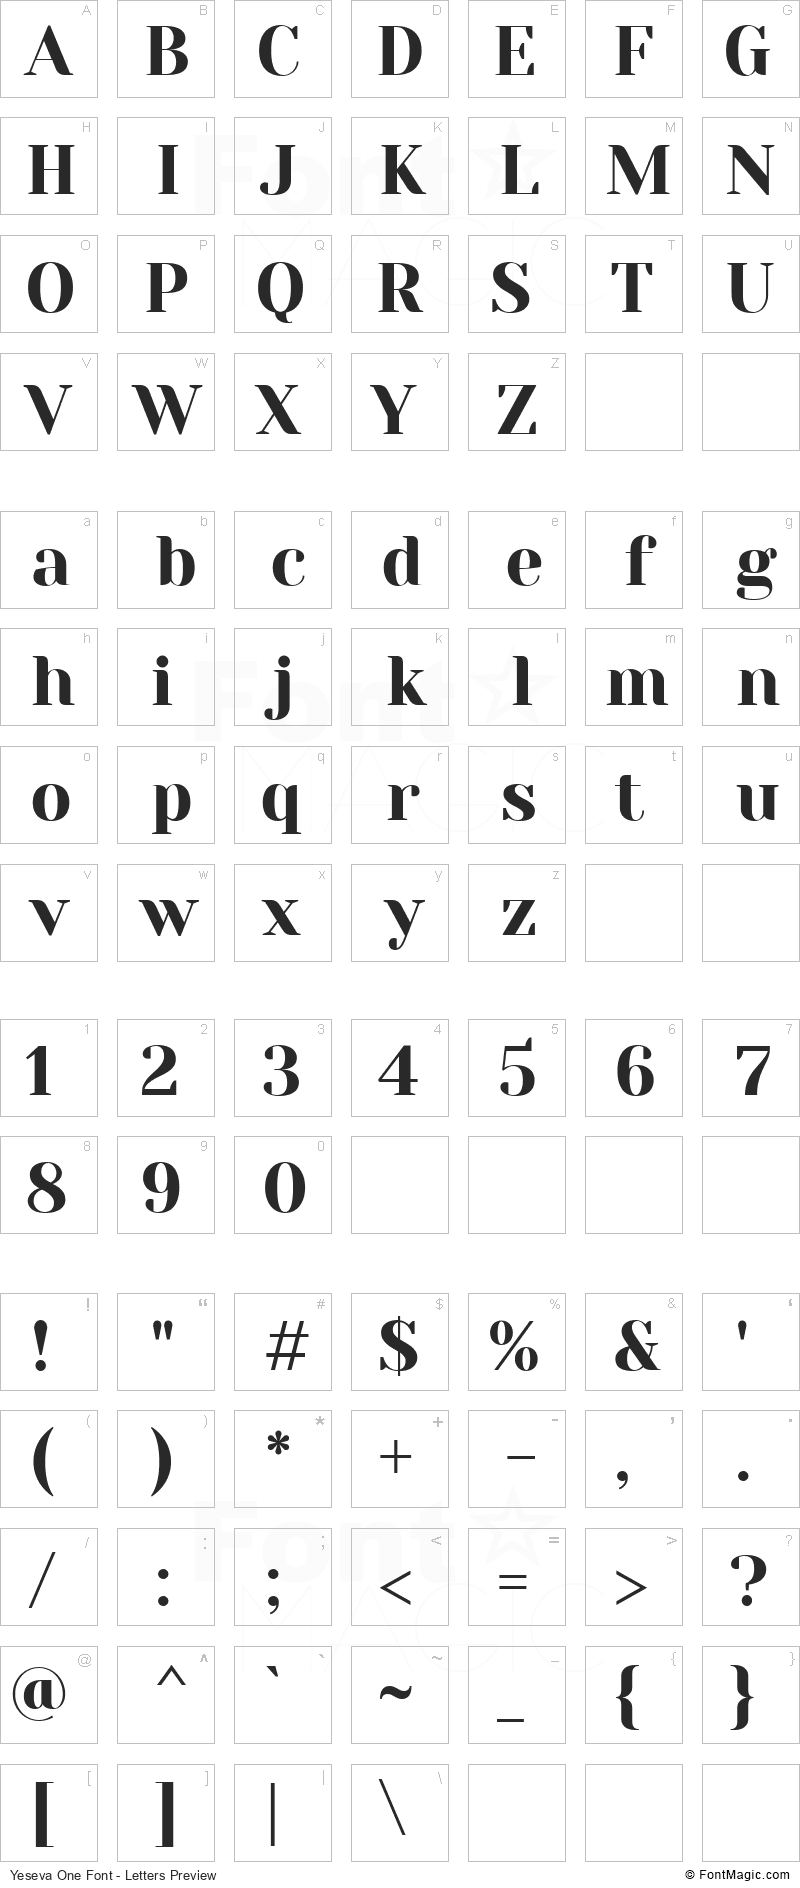 Yeseva One Font - All Latters Preview Chart